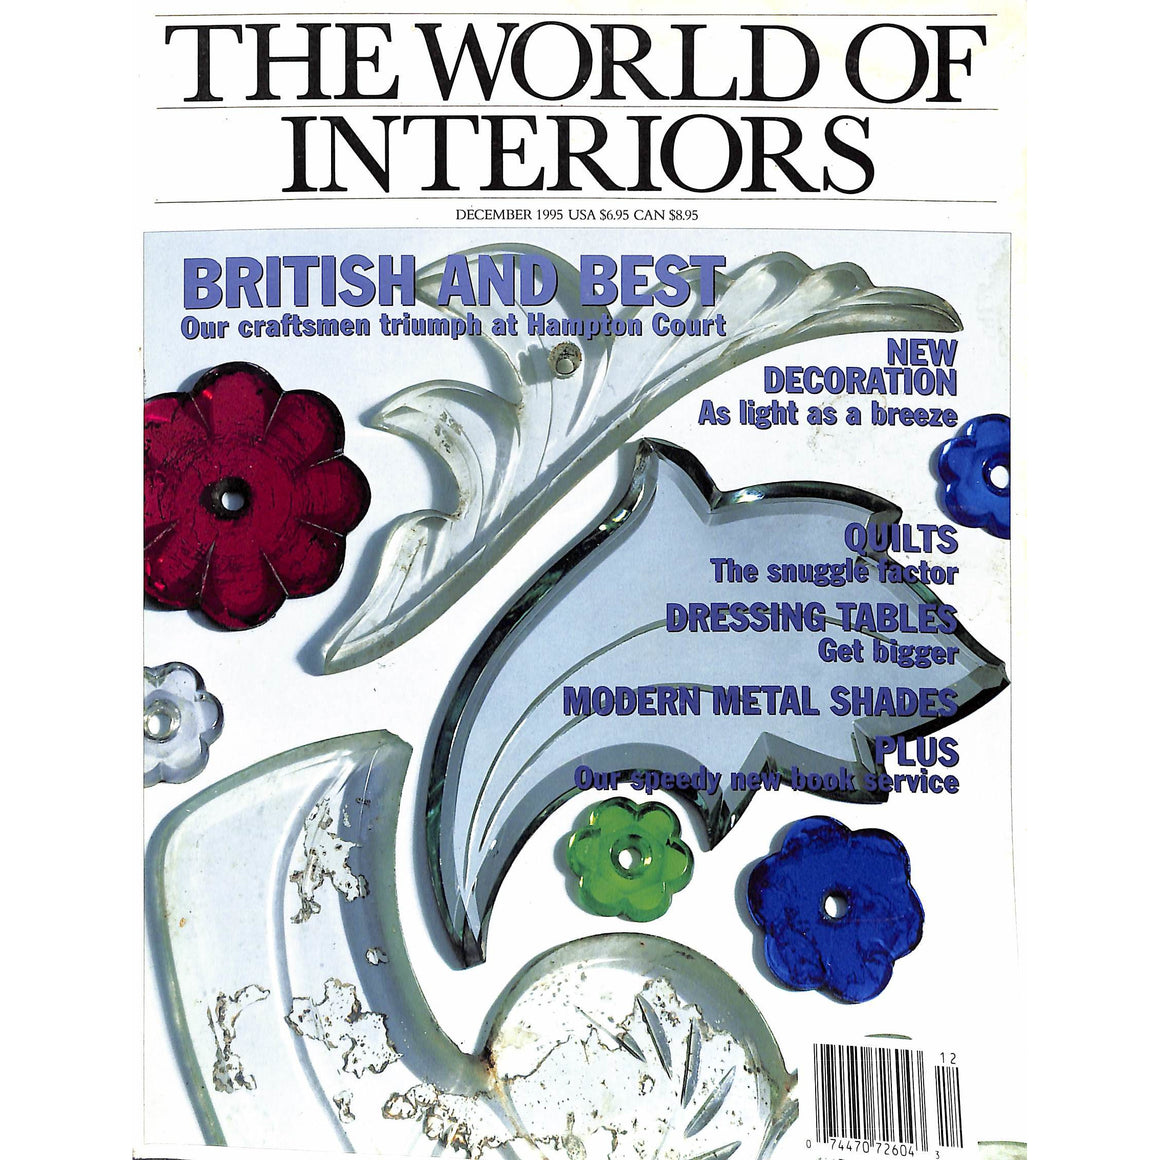 "The World Of Interiors" December 1995 (SOLD)